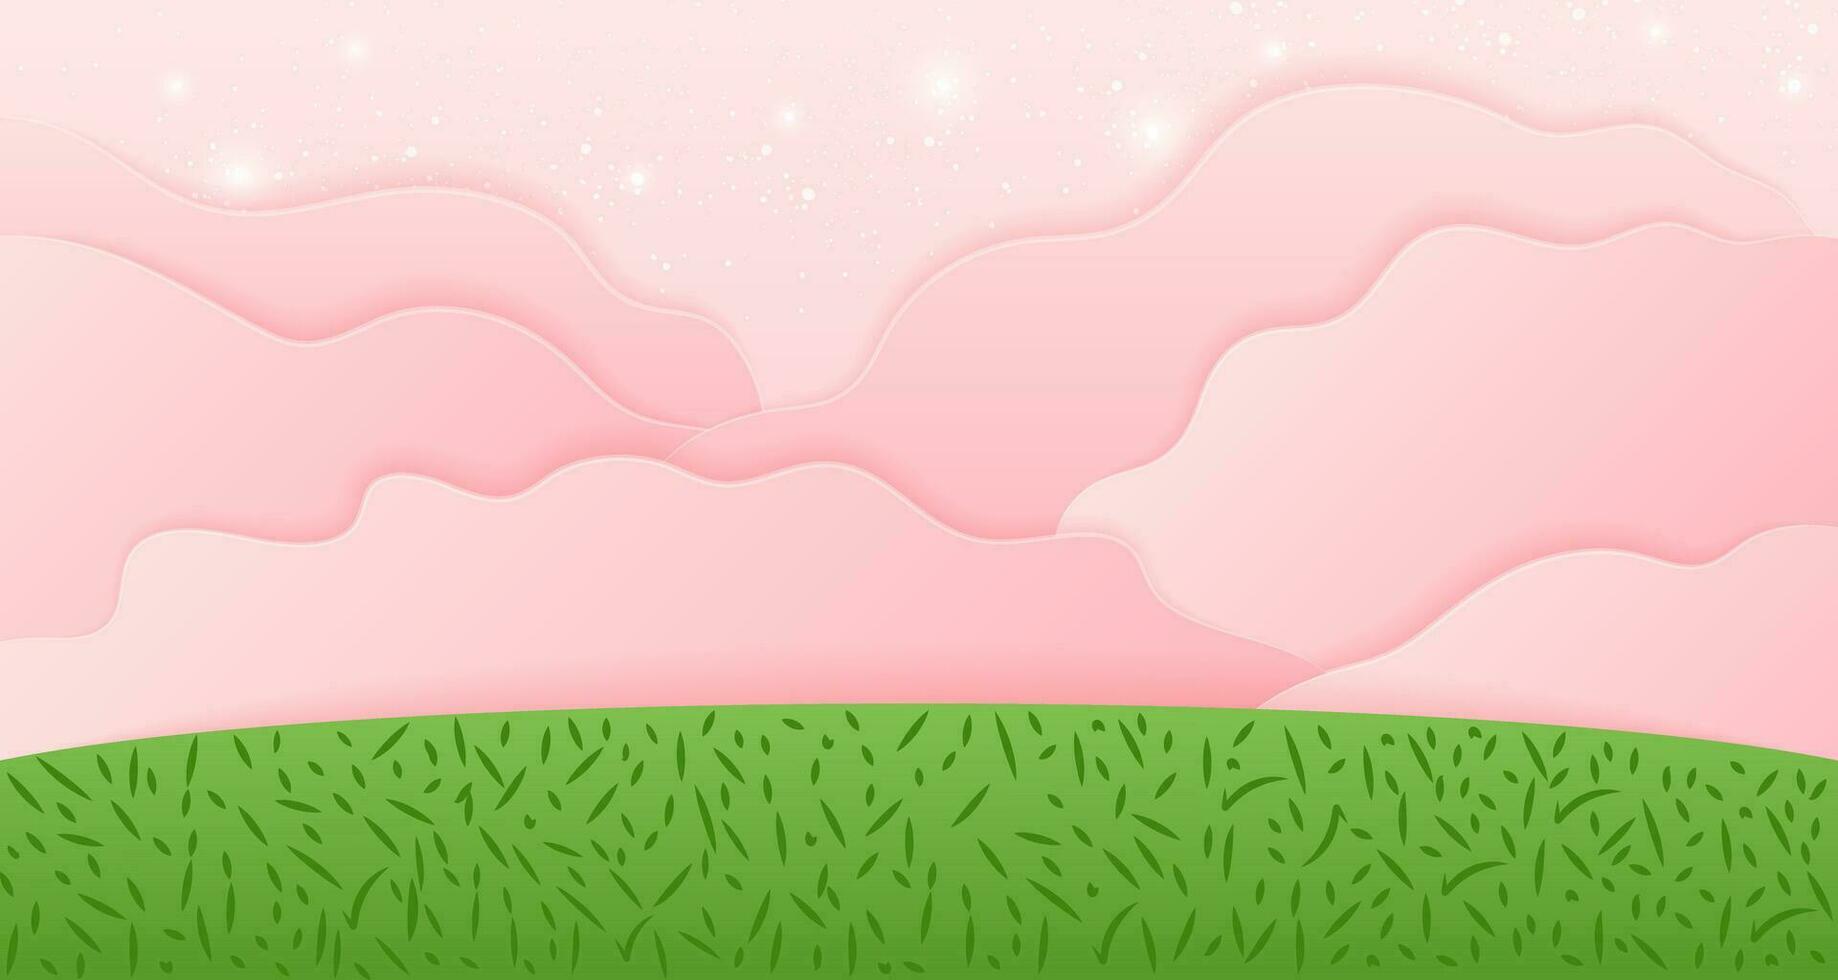 Cartoon nature background with green field and pink clouds. Cute vector illustration of landscape. Wallpapers in paper cut style.